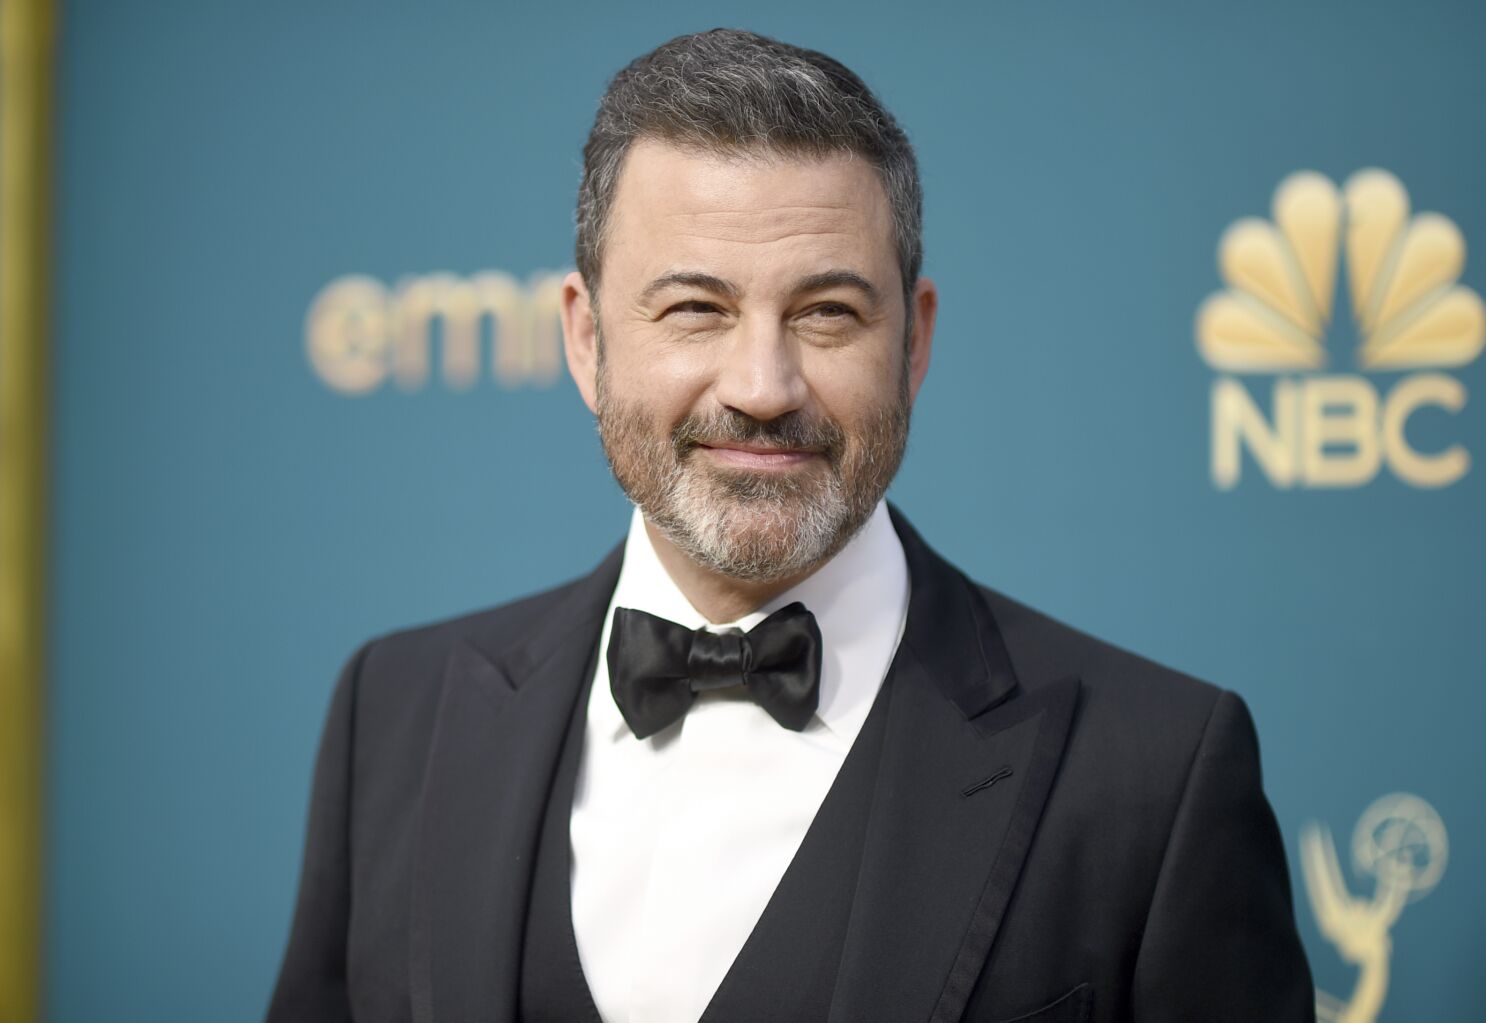 Jimmy Kimmel says lost fans over Donald Trump criticisms - Angeles Times